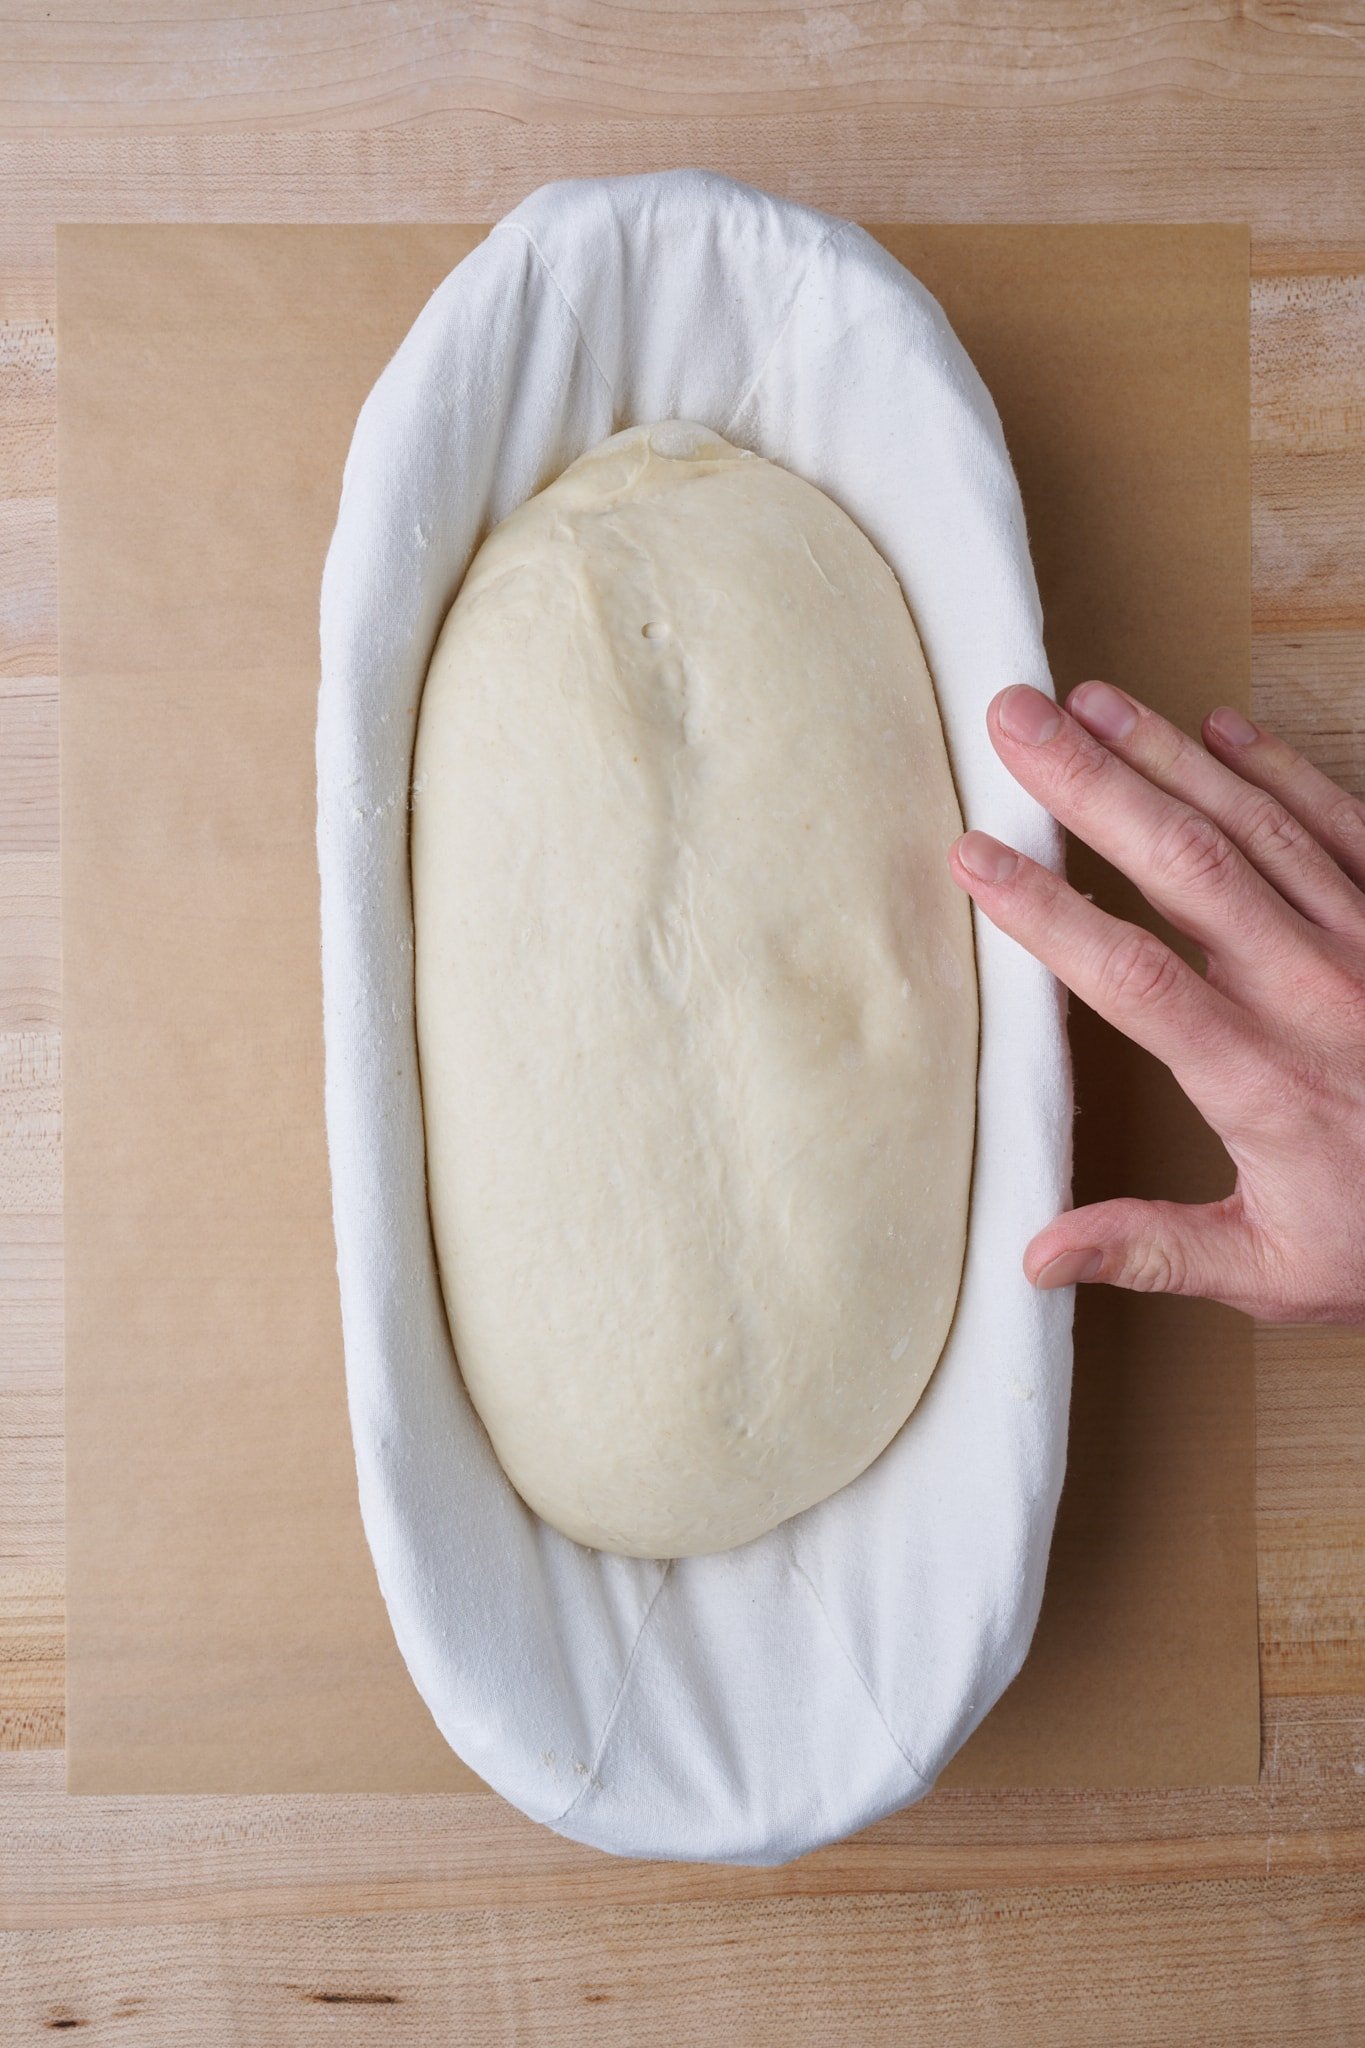 How to Use the Dough Poke Test